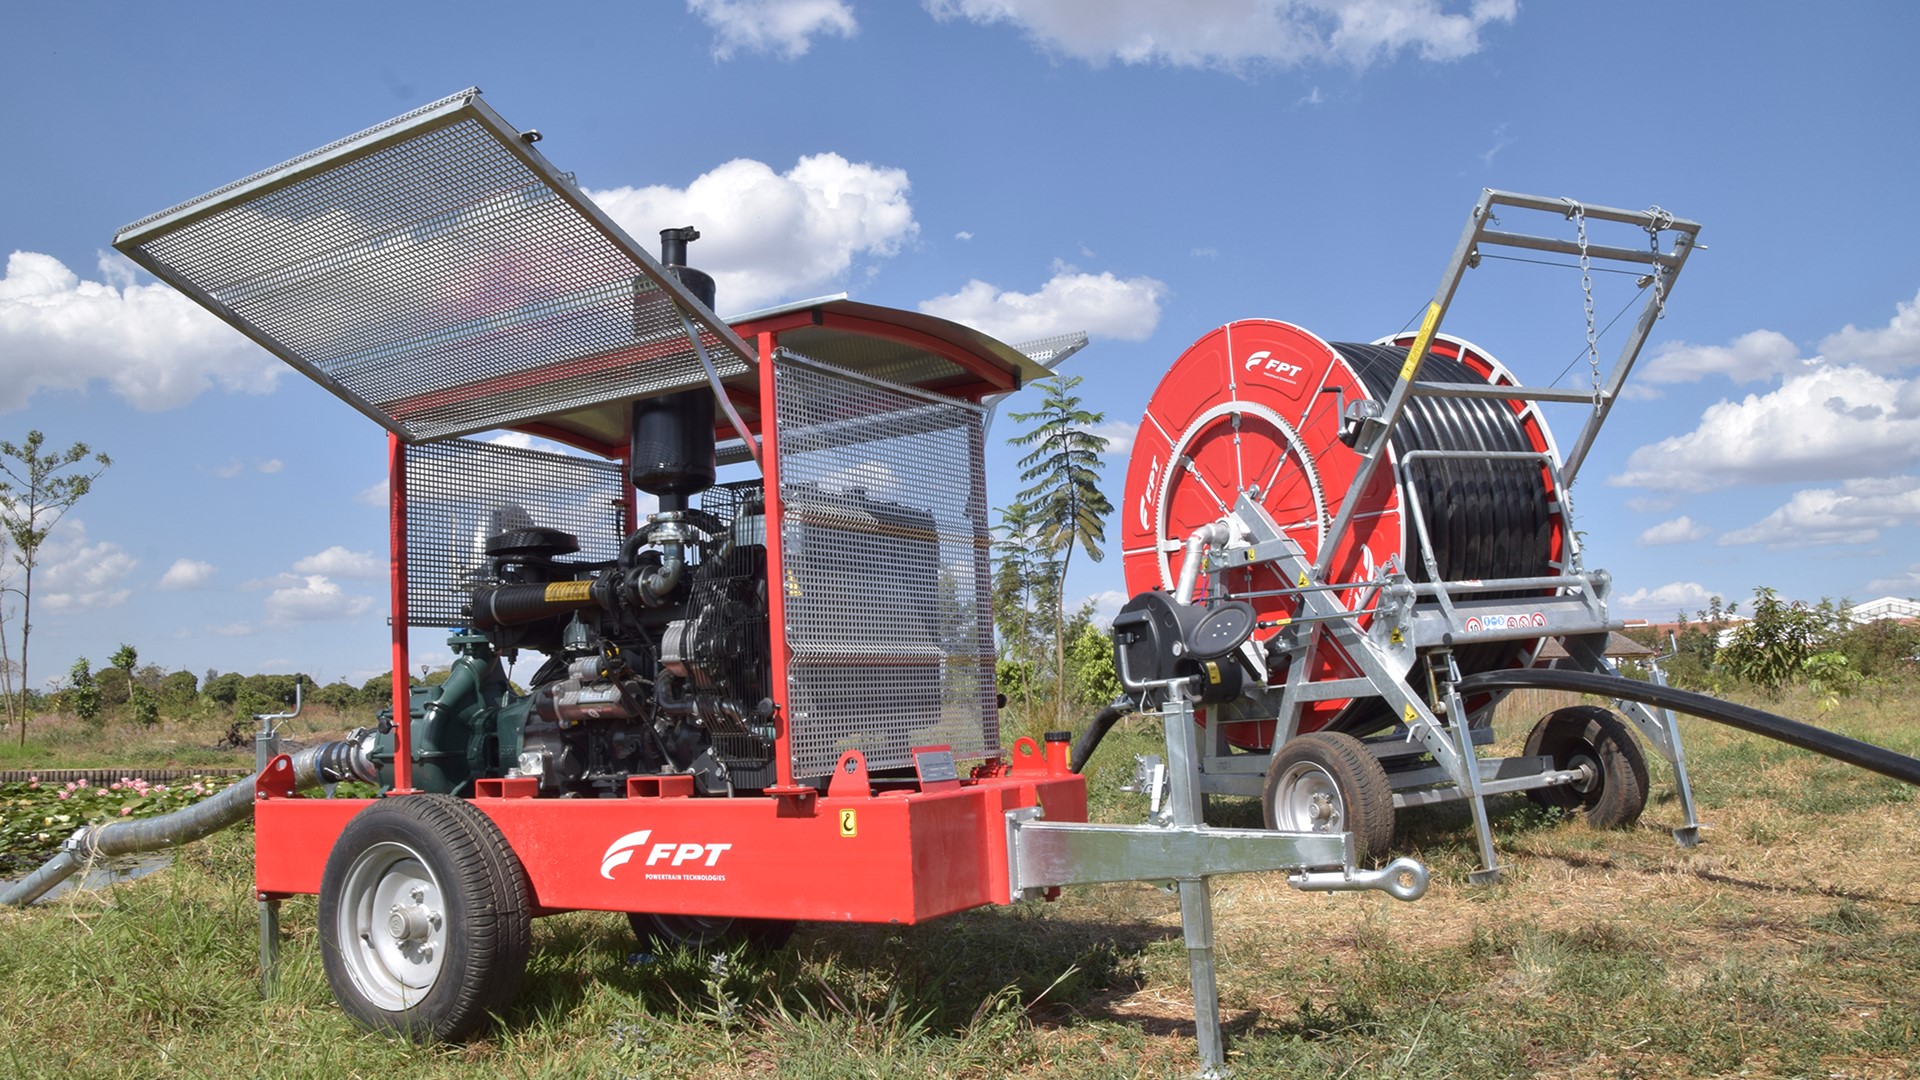 FPT Industrial irrigation system for the University of Nairobi